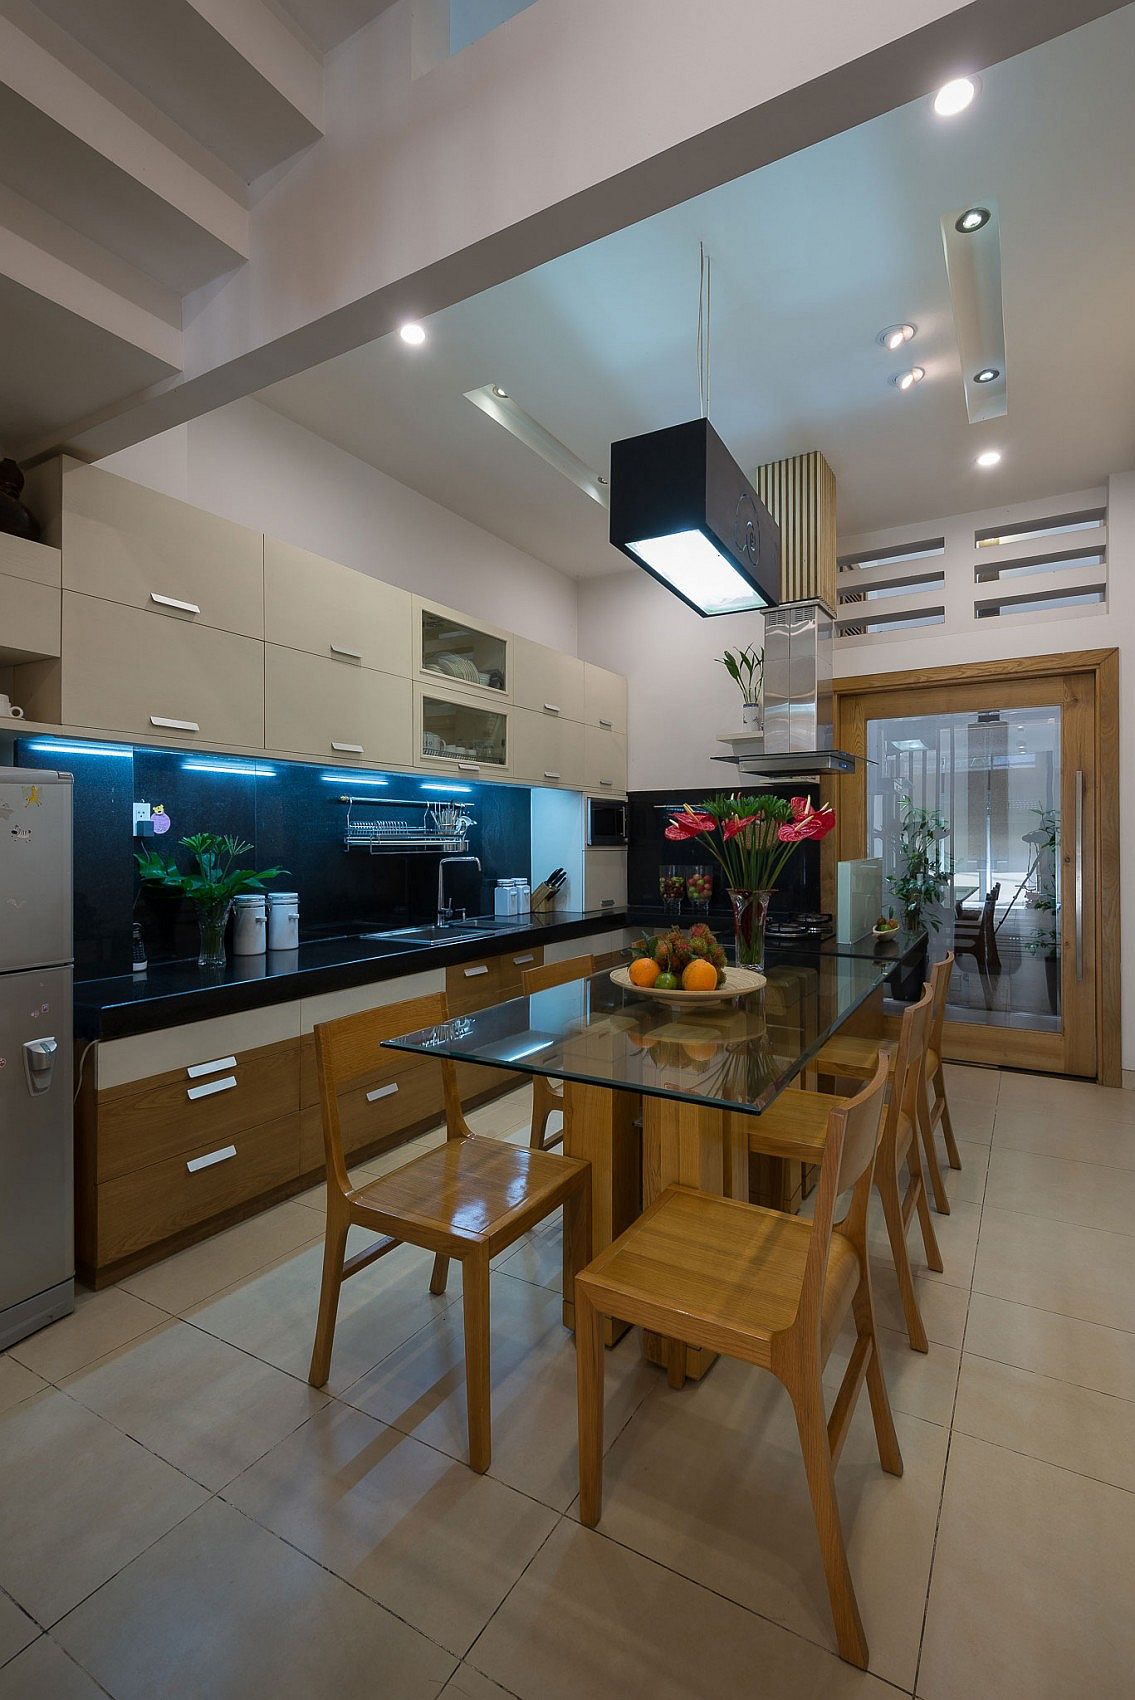 Simple L-shape kitchen and dining space design